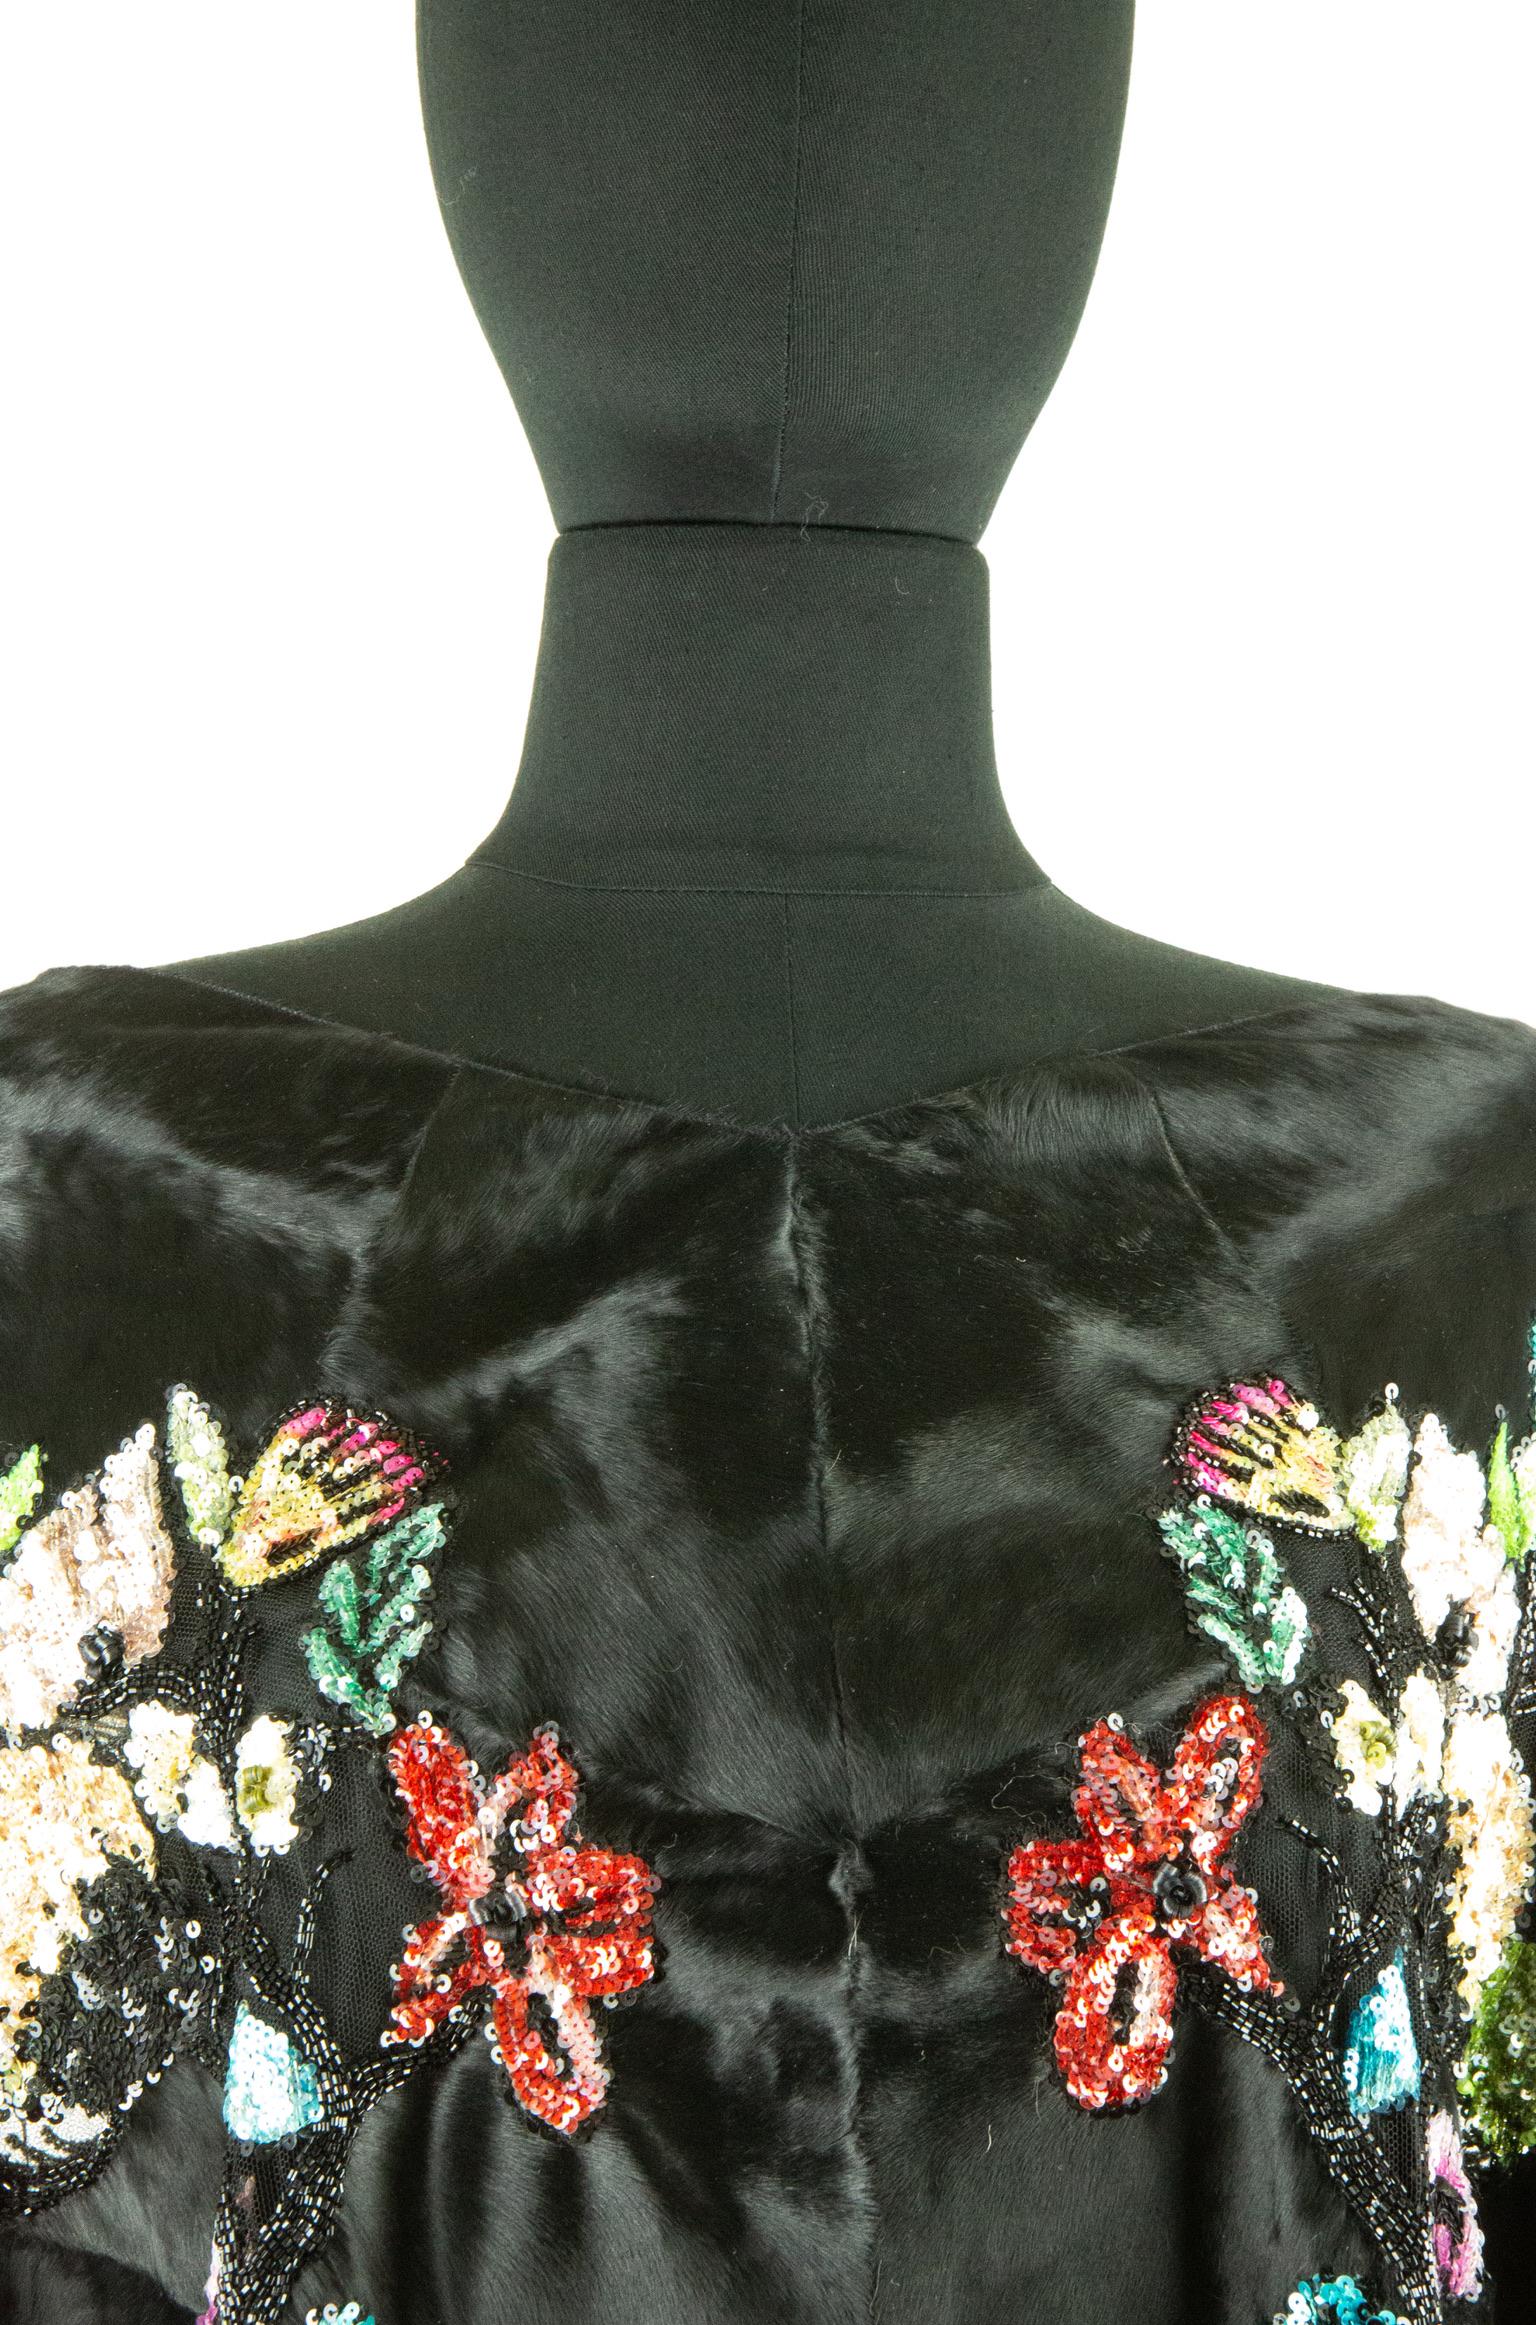 This Valentino shawl is made from Broadtail dyed lambs’ fur and features an all-over glass beaded embroidery of an assortment of flowers in a range of bright colours. The shawl has a wide neckline and mid-length sleeves and falls just below the